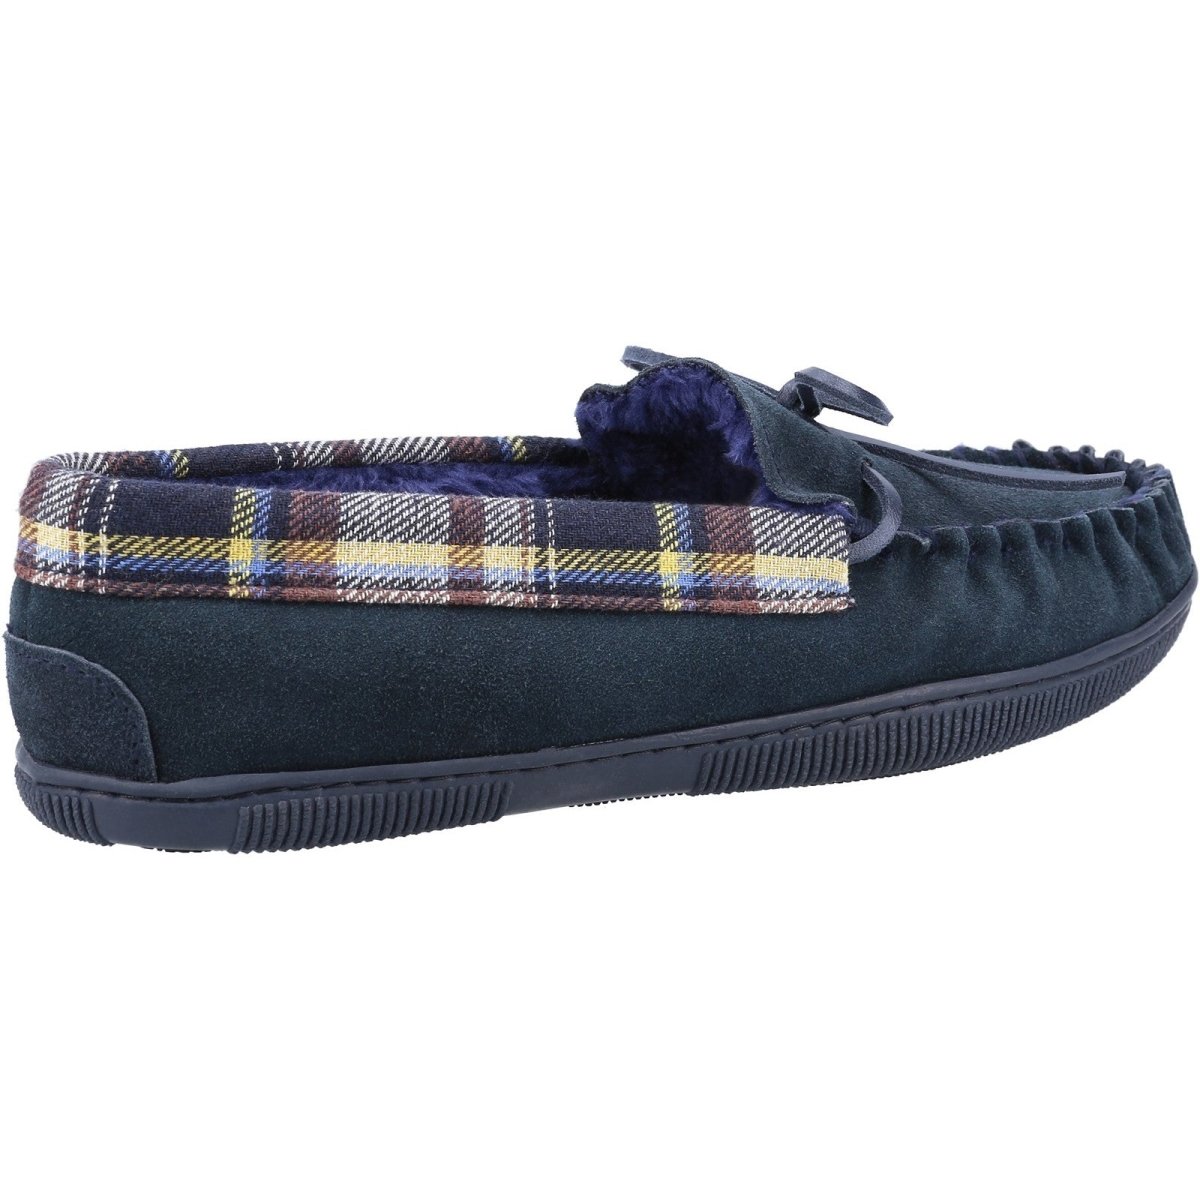 Cotswold Sodbury Suede Mens Moccasin Slippers - Shoe Store Direct